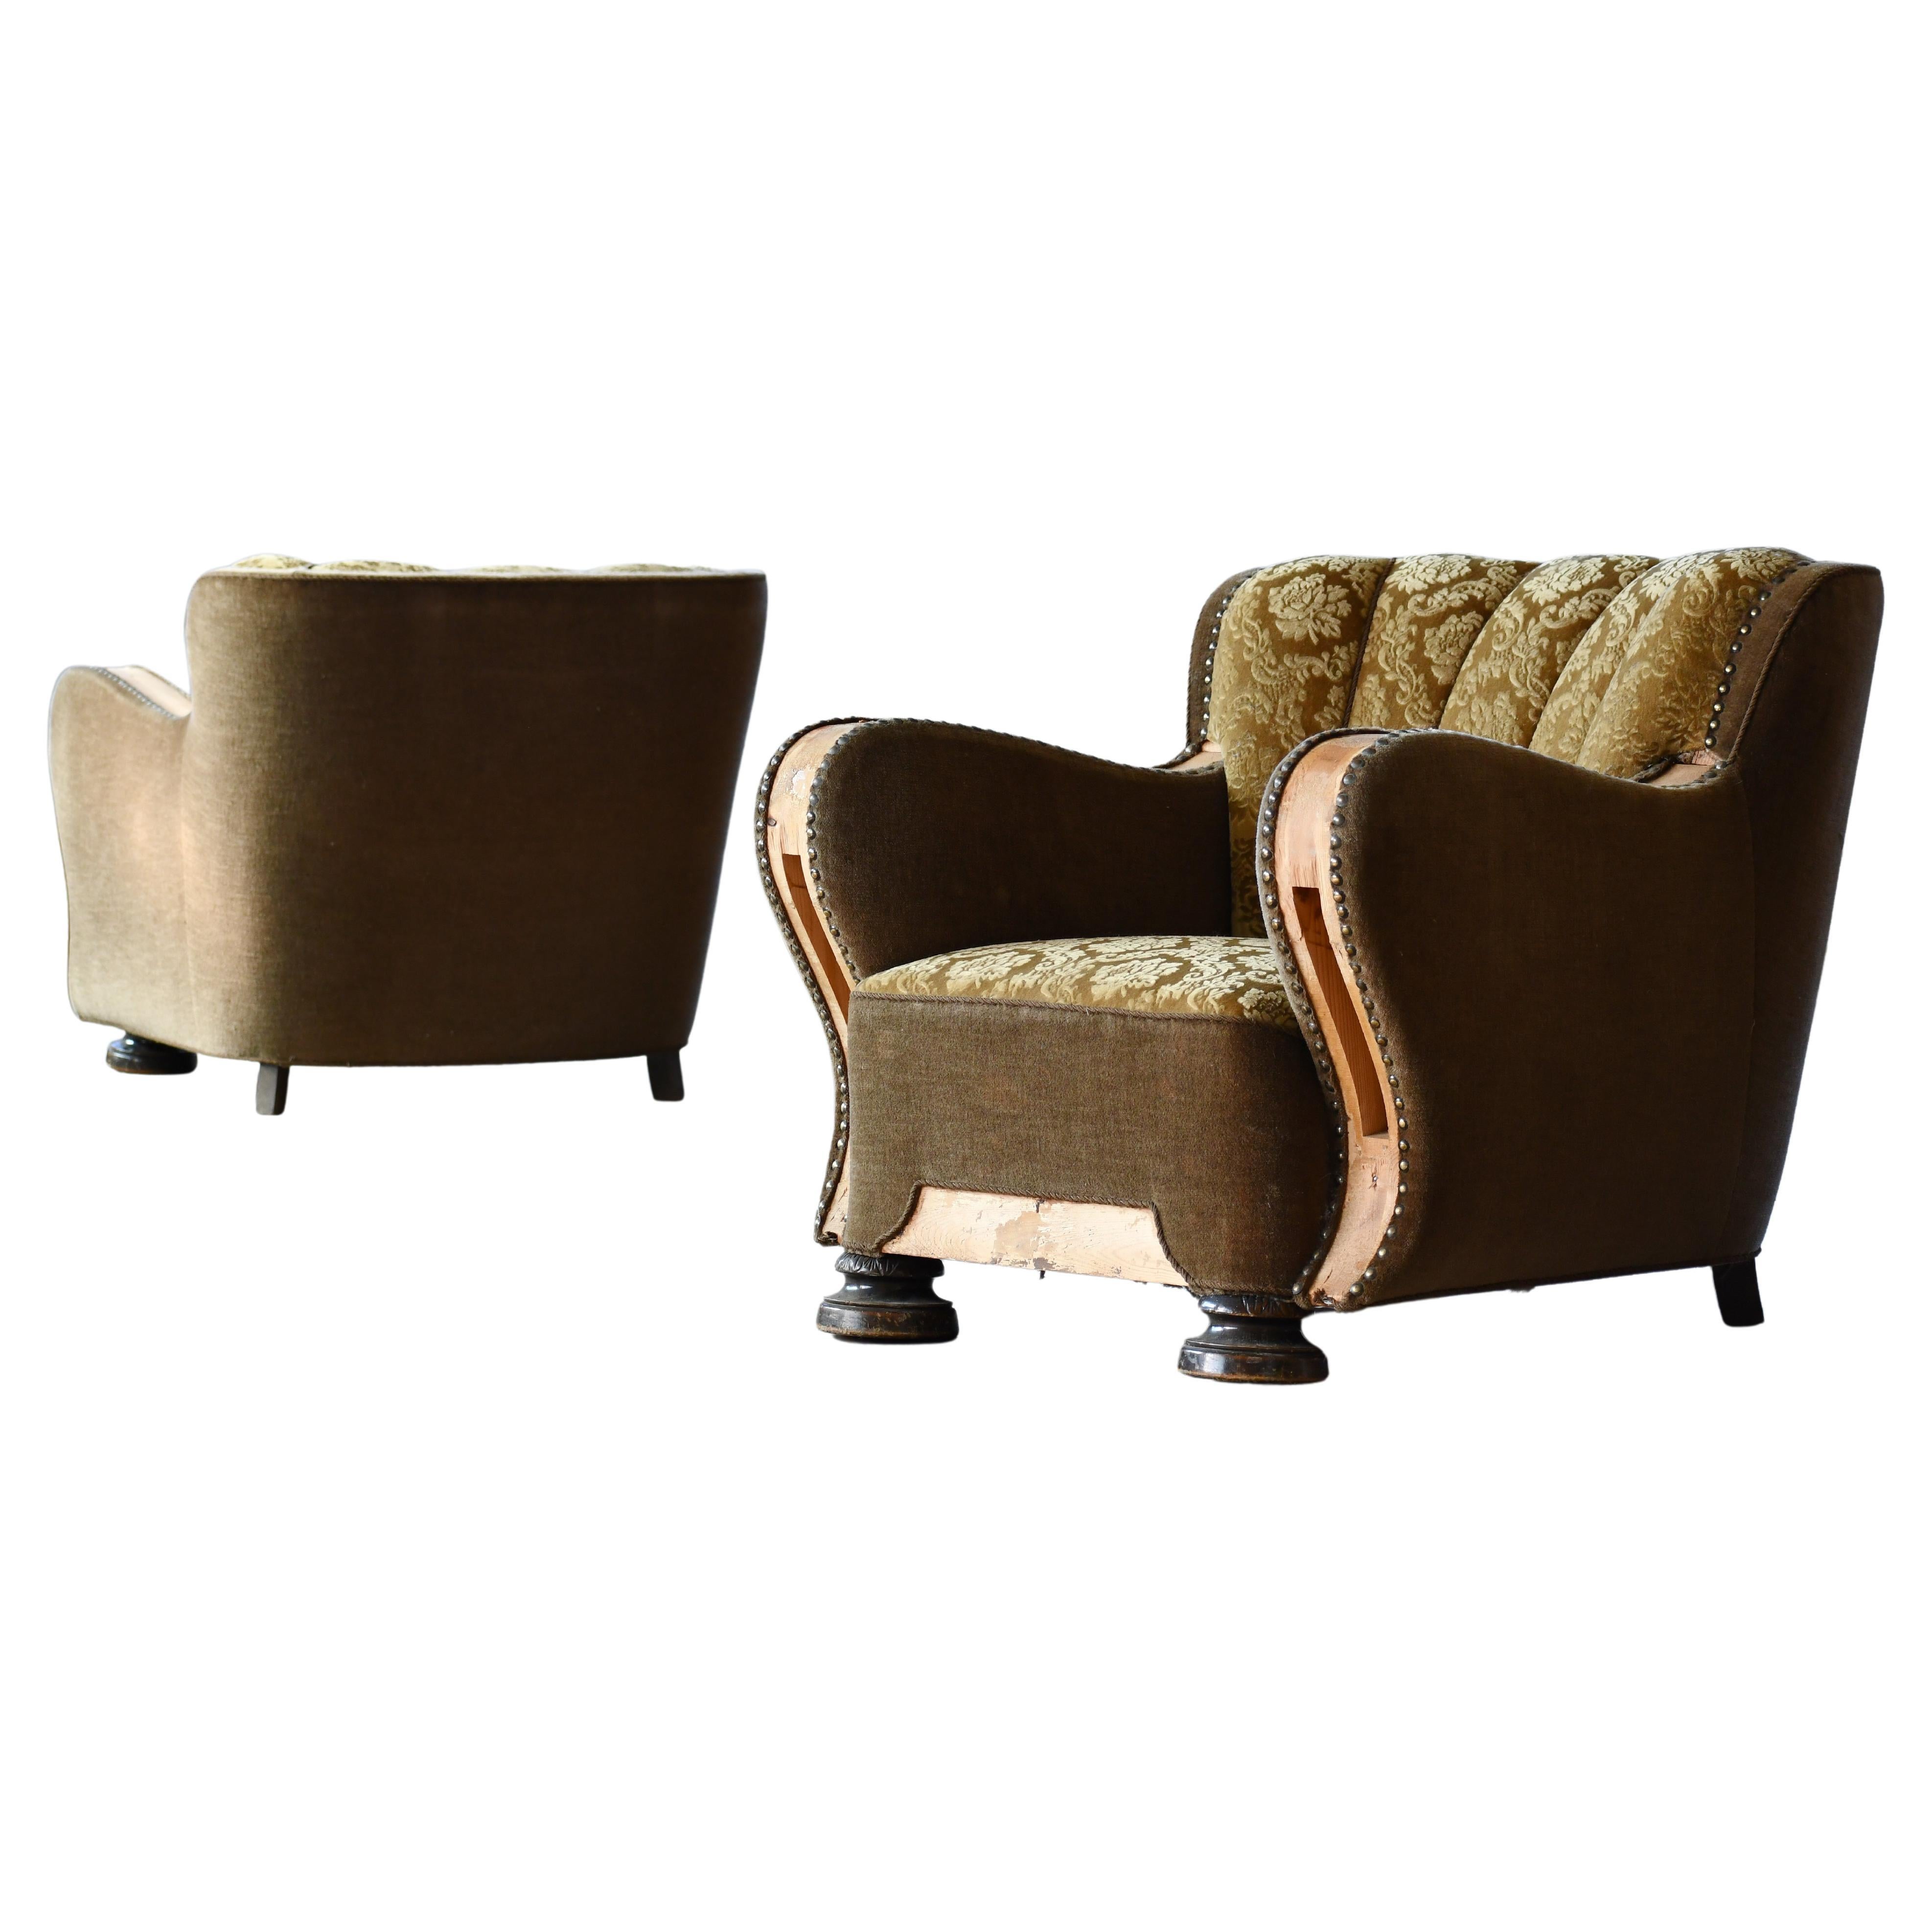 Pair of Danish Art Deco Club or Lounge Chairs, 1930s